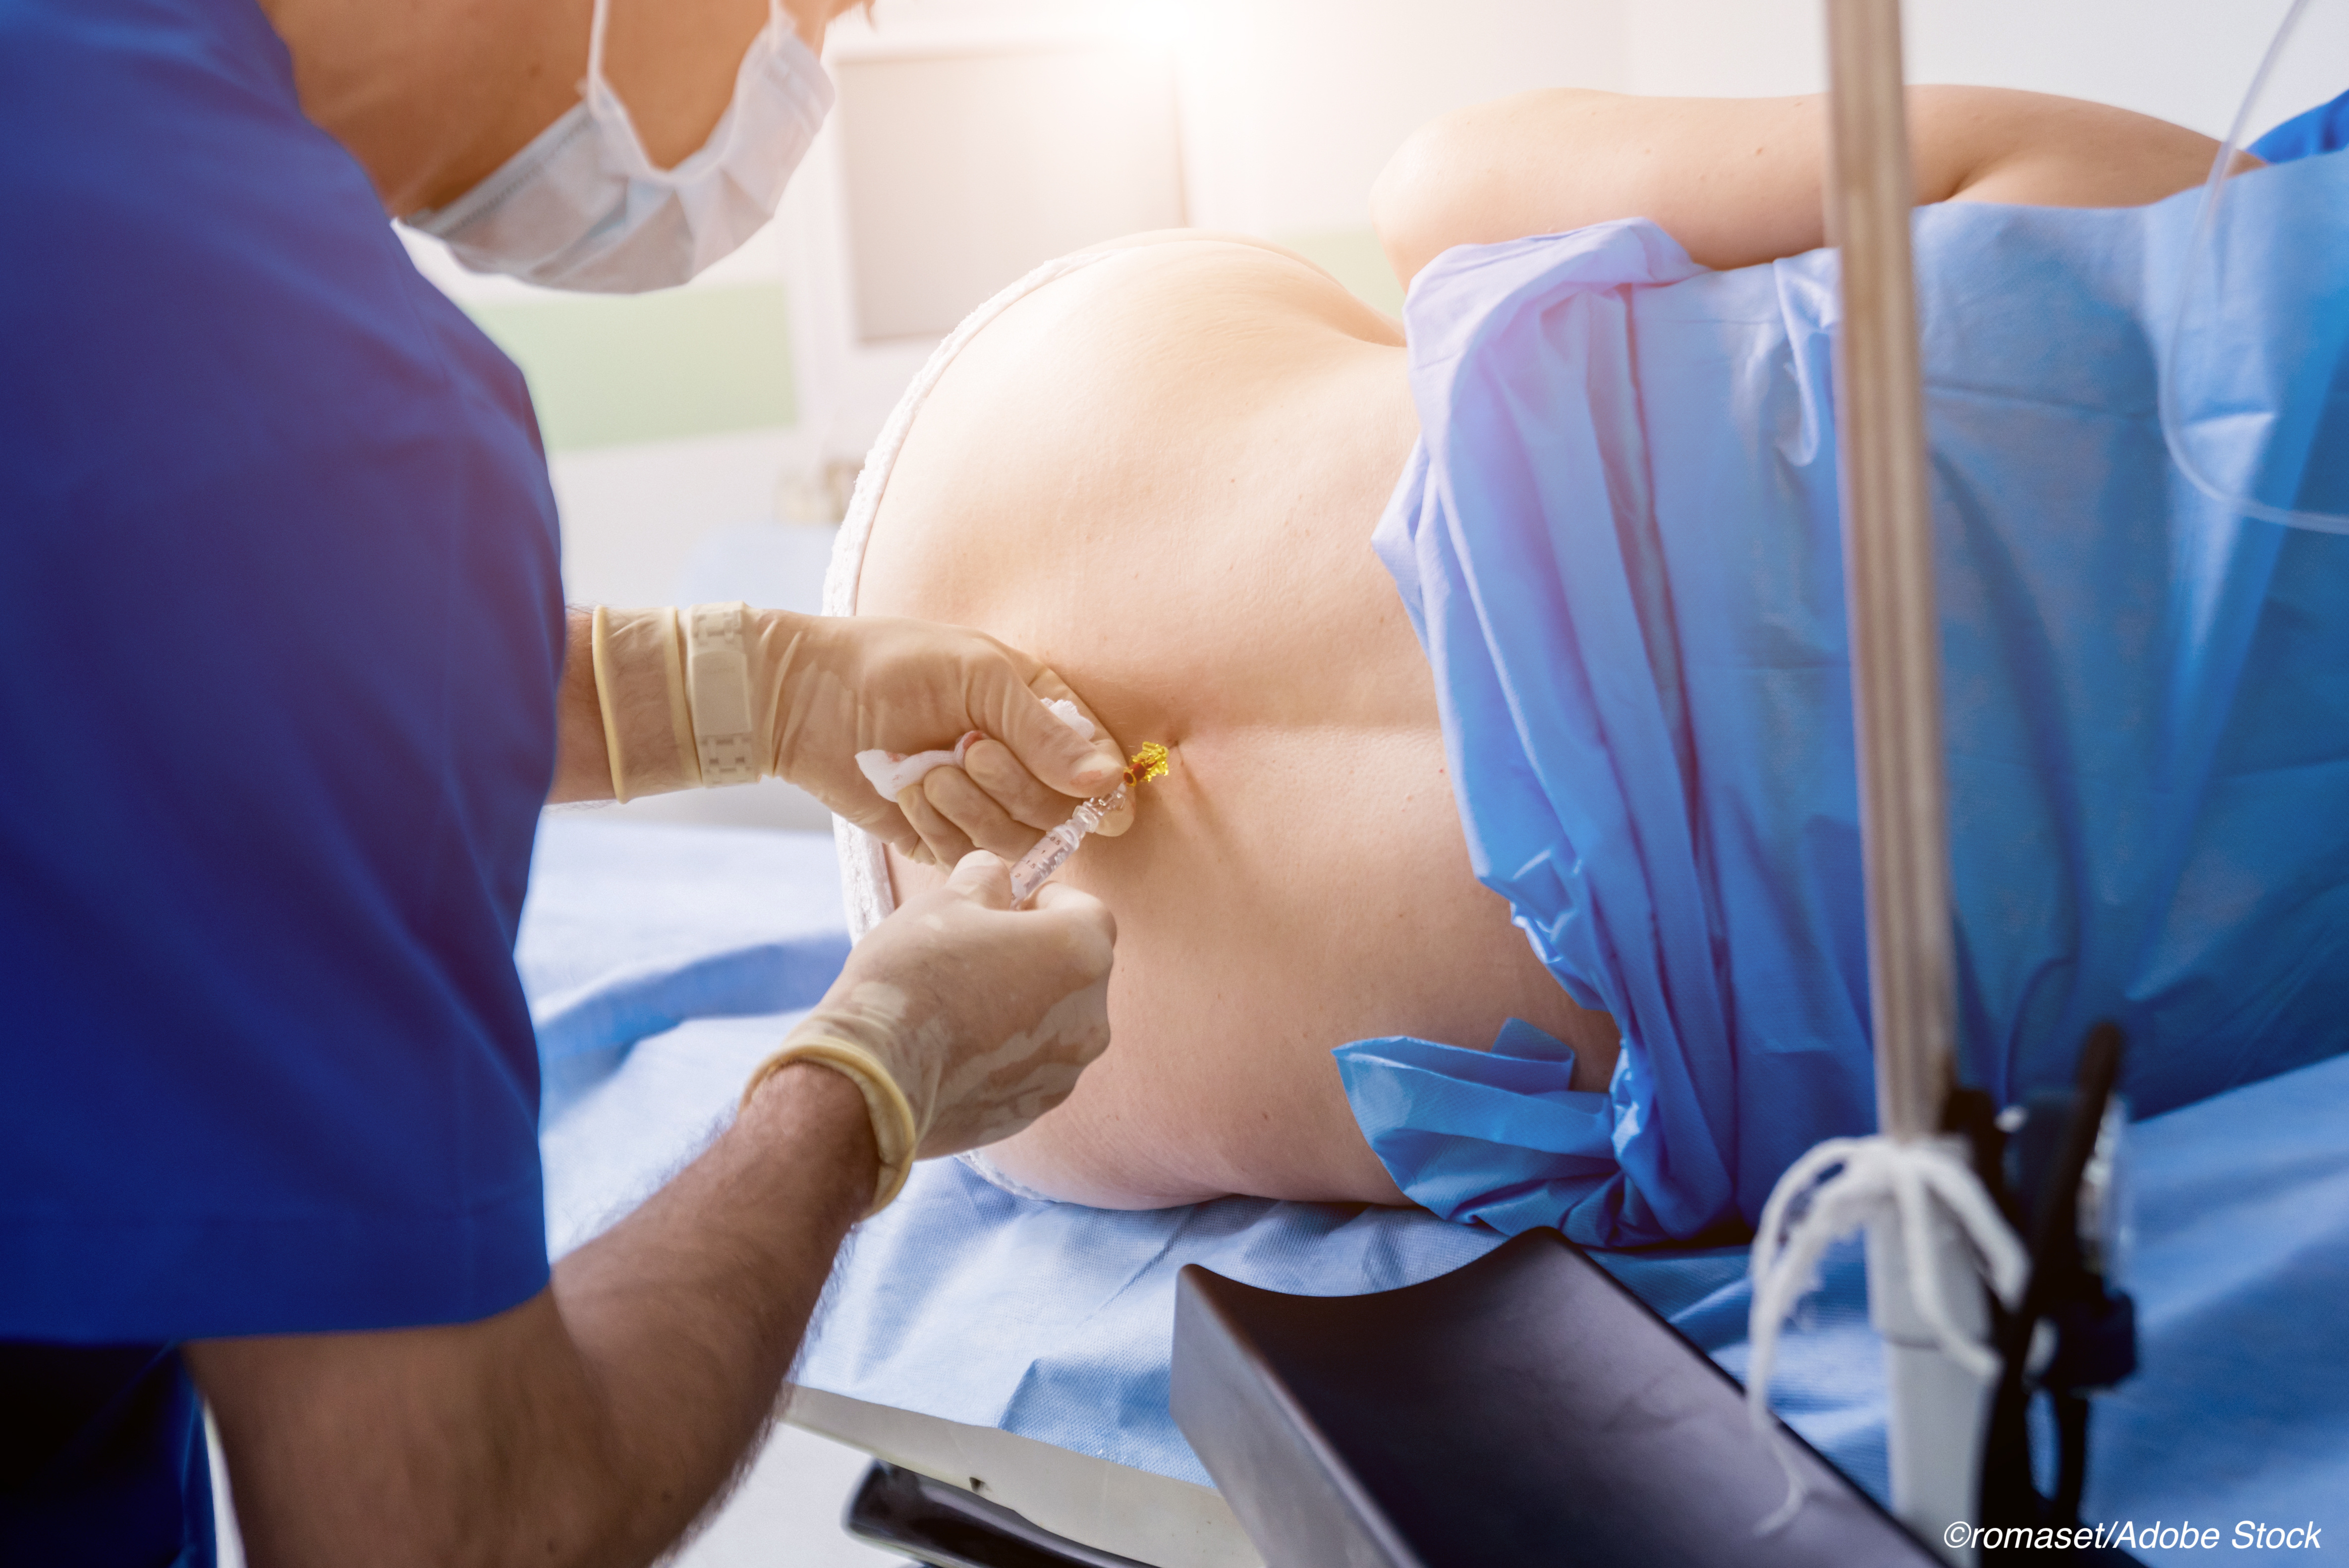 Epidural Use During Delivery Doesn’t Impact Offspring Neurodevelopment, Study Finds